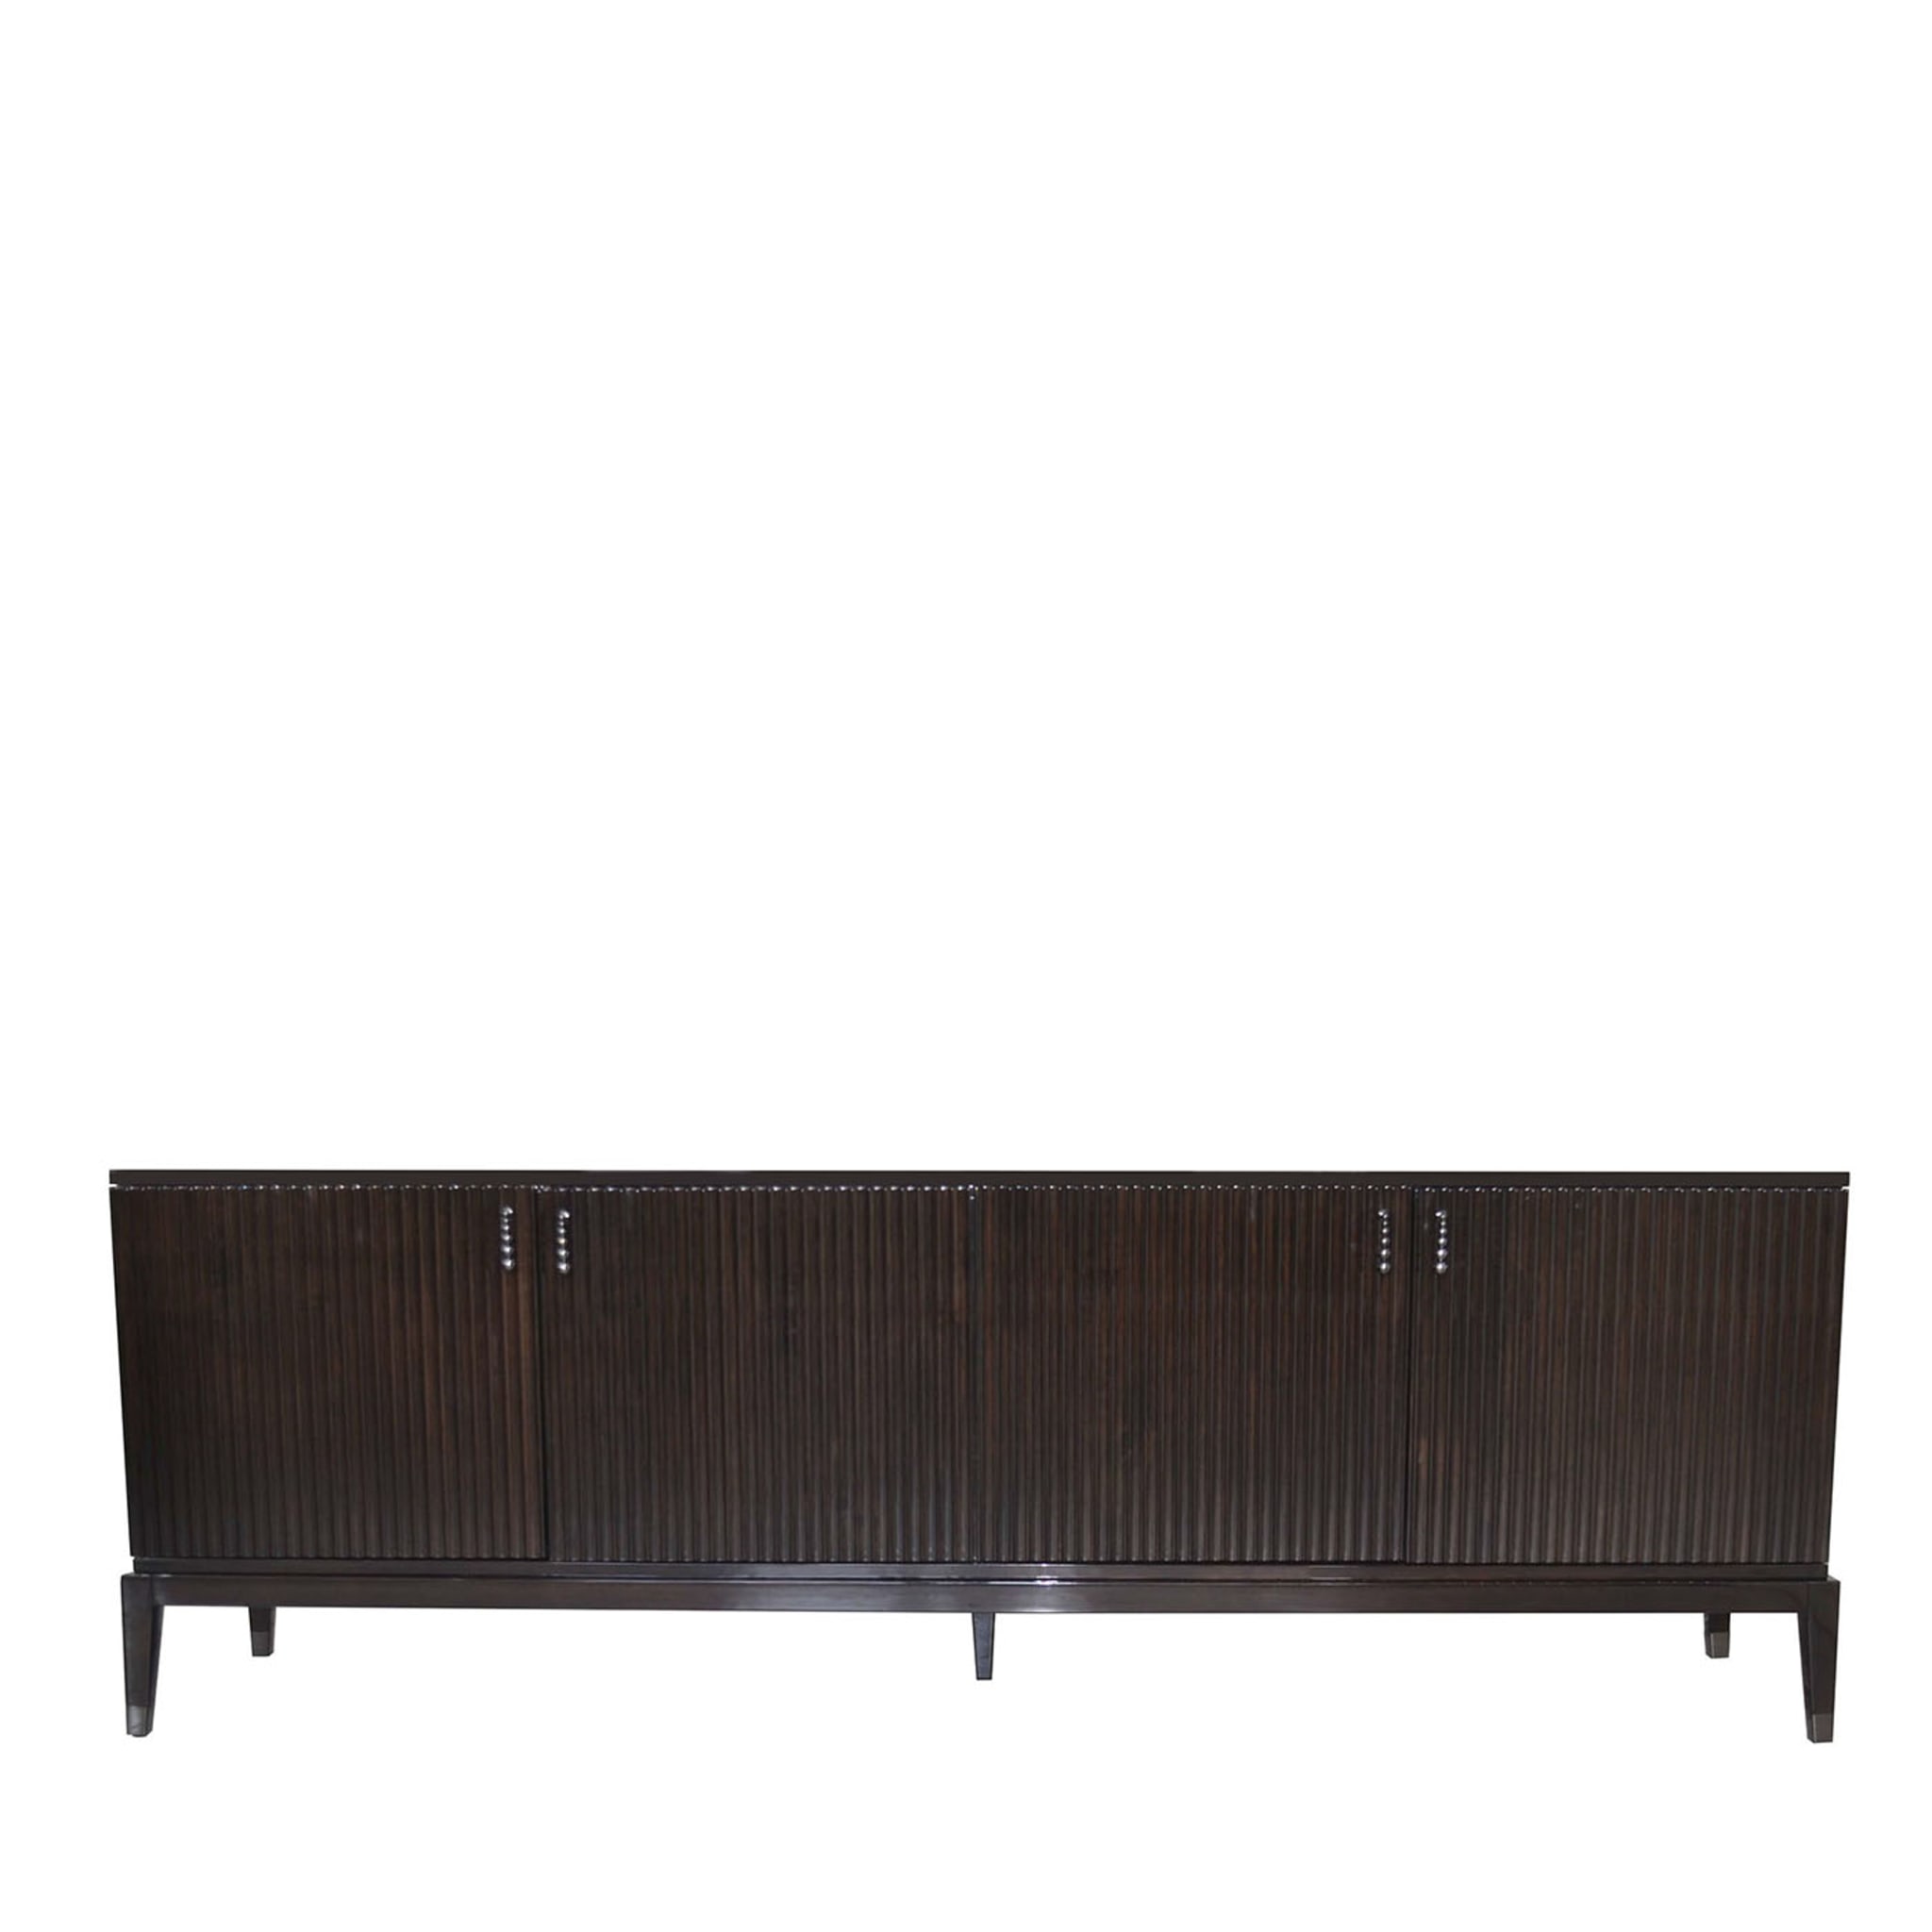 Italian Sideboard in Ebony Brown Color with Four Doors - Main view